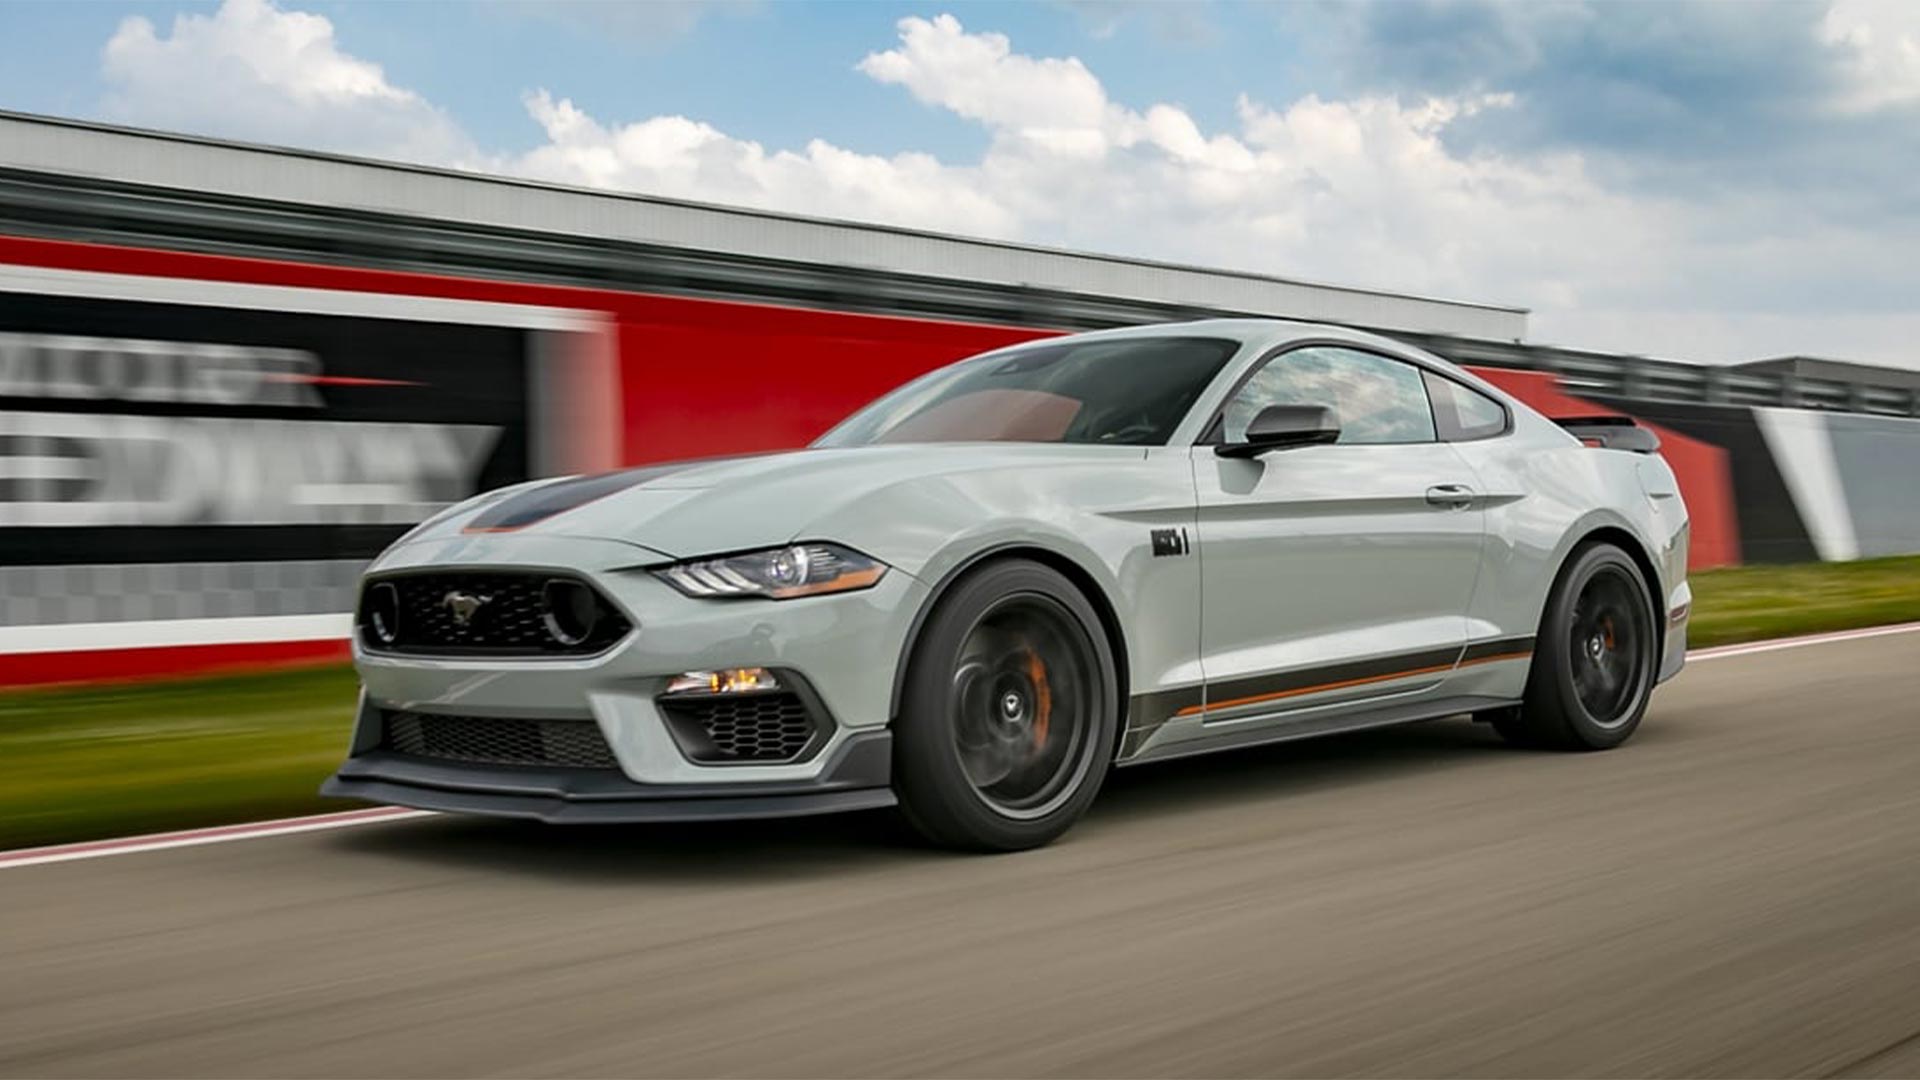 Image of a model year 2018 to 2023 Ford Mustang